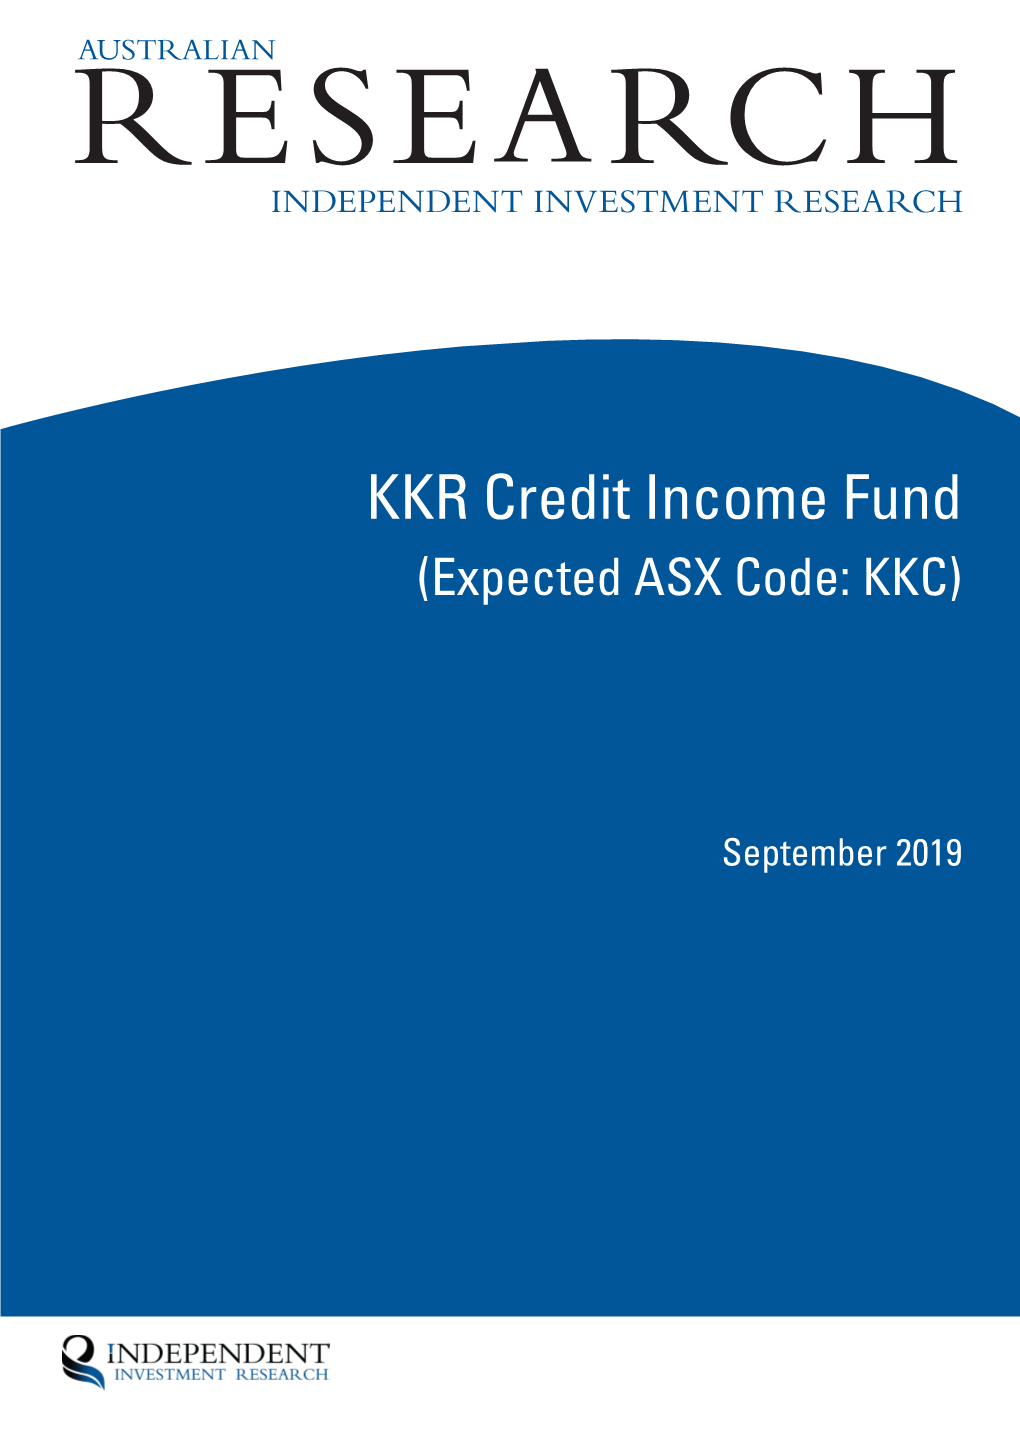 KKR Credit Income Fund (Expected ASX Code: KKC)